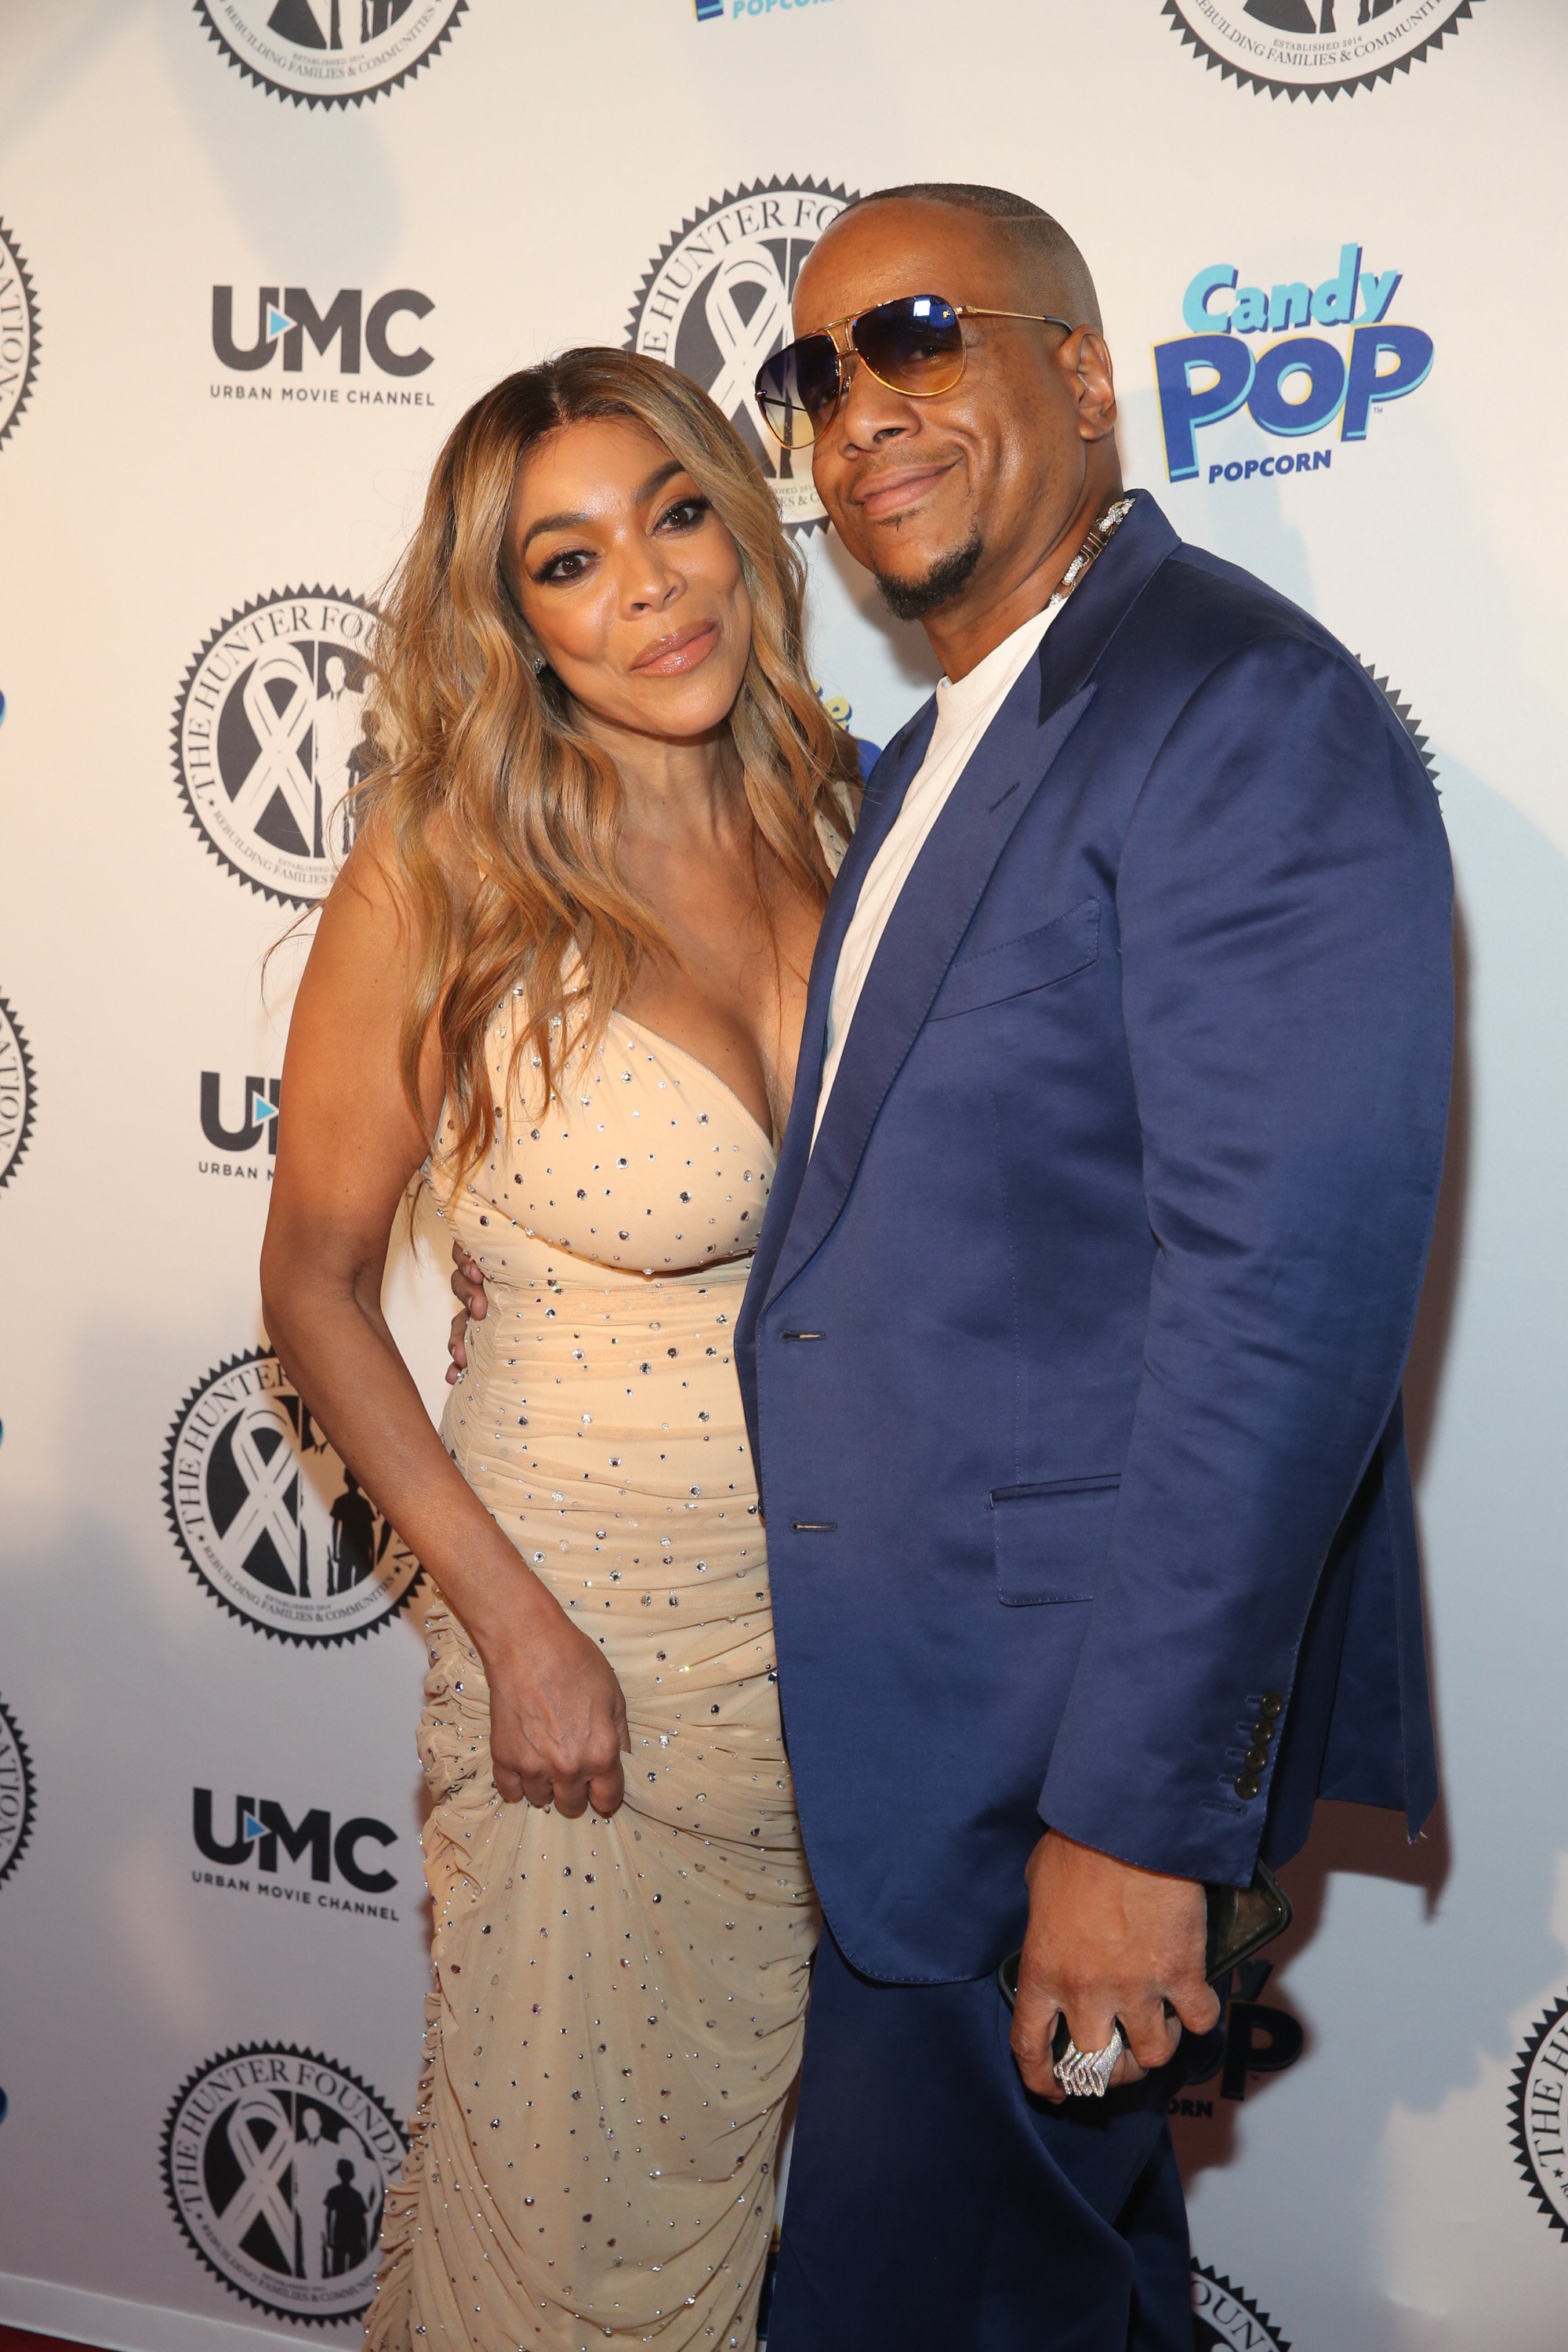 Wendy Williams & Kevin Hunter attend ‘Wendy Williams and The Hunter Foundation’ gala in New York on July 18, 2018. | Photo: Getty Images